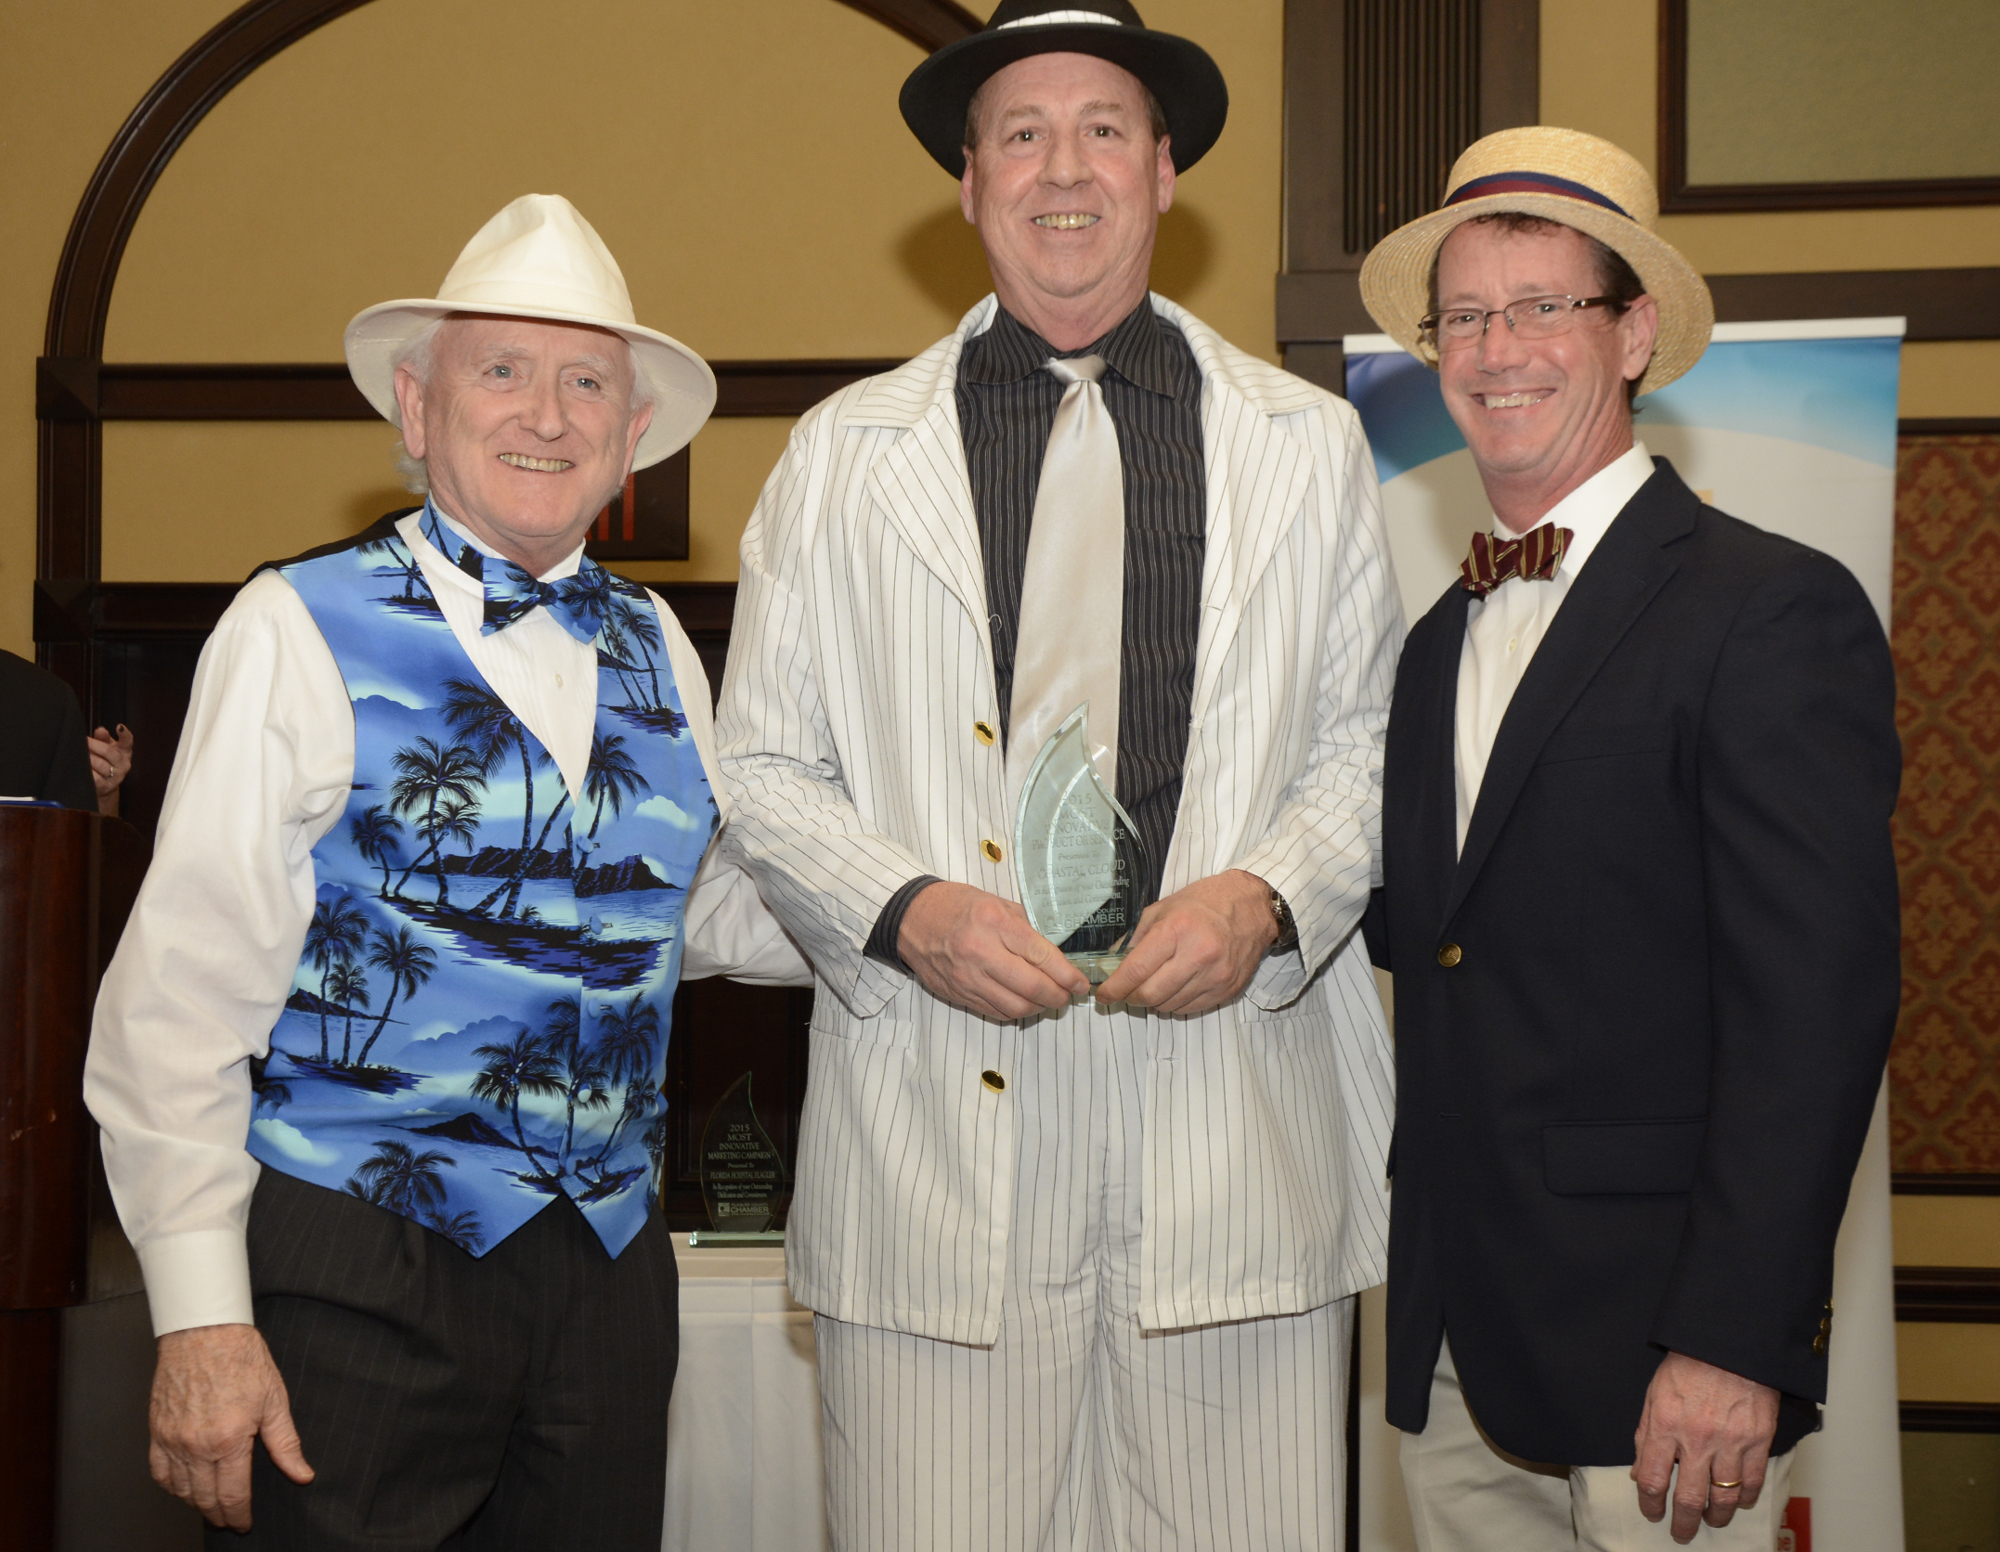 Toby Tobin, Gene Compton and Jake Scully, of Coastal Cloud, won the 2015 Most Innovative Product or Service award.